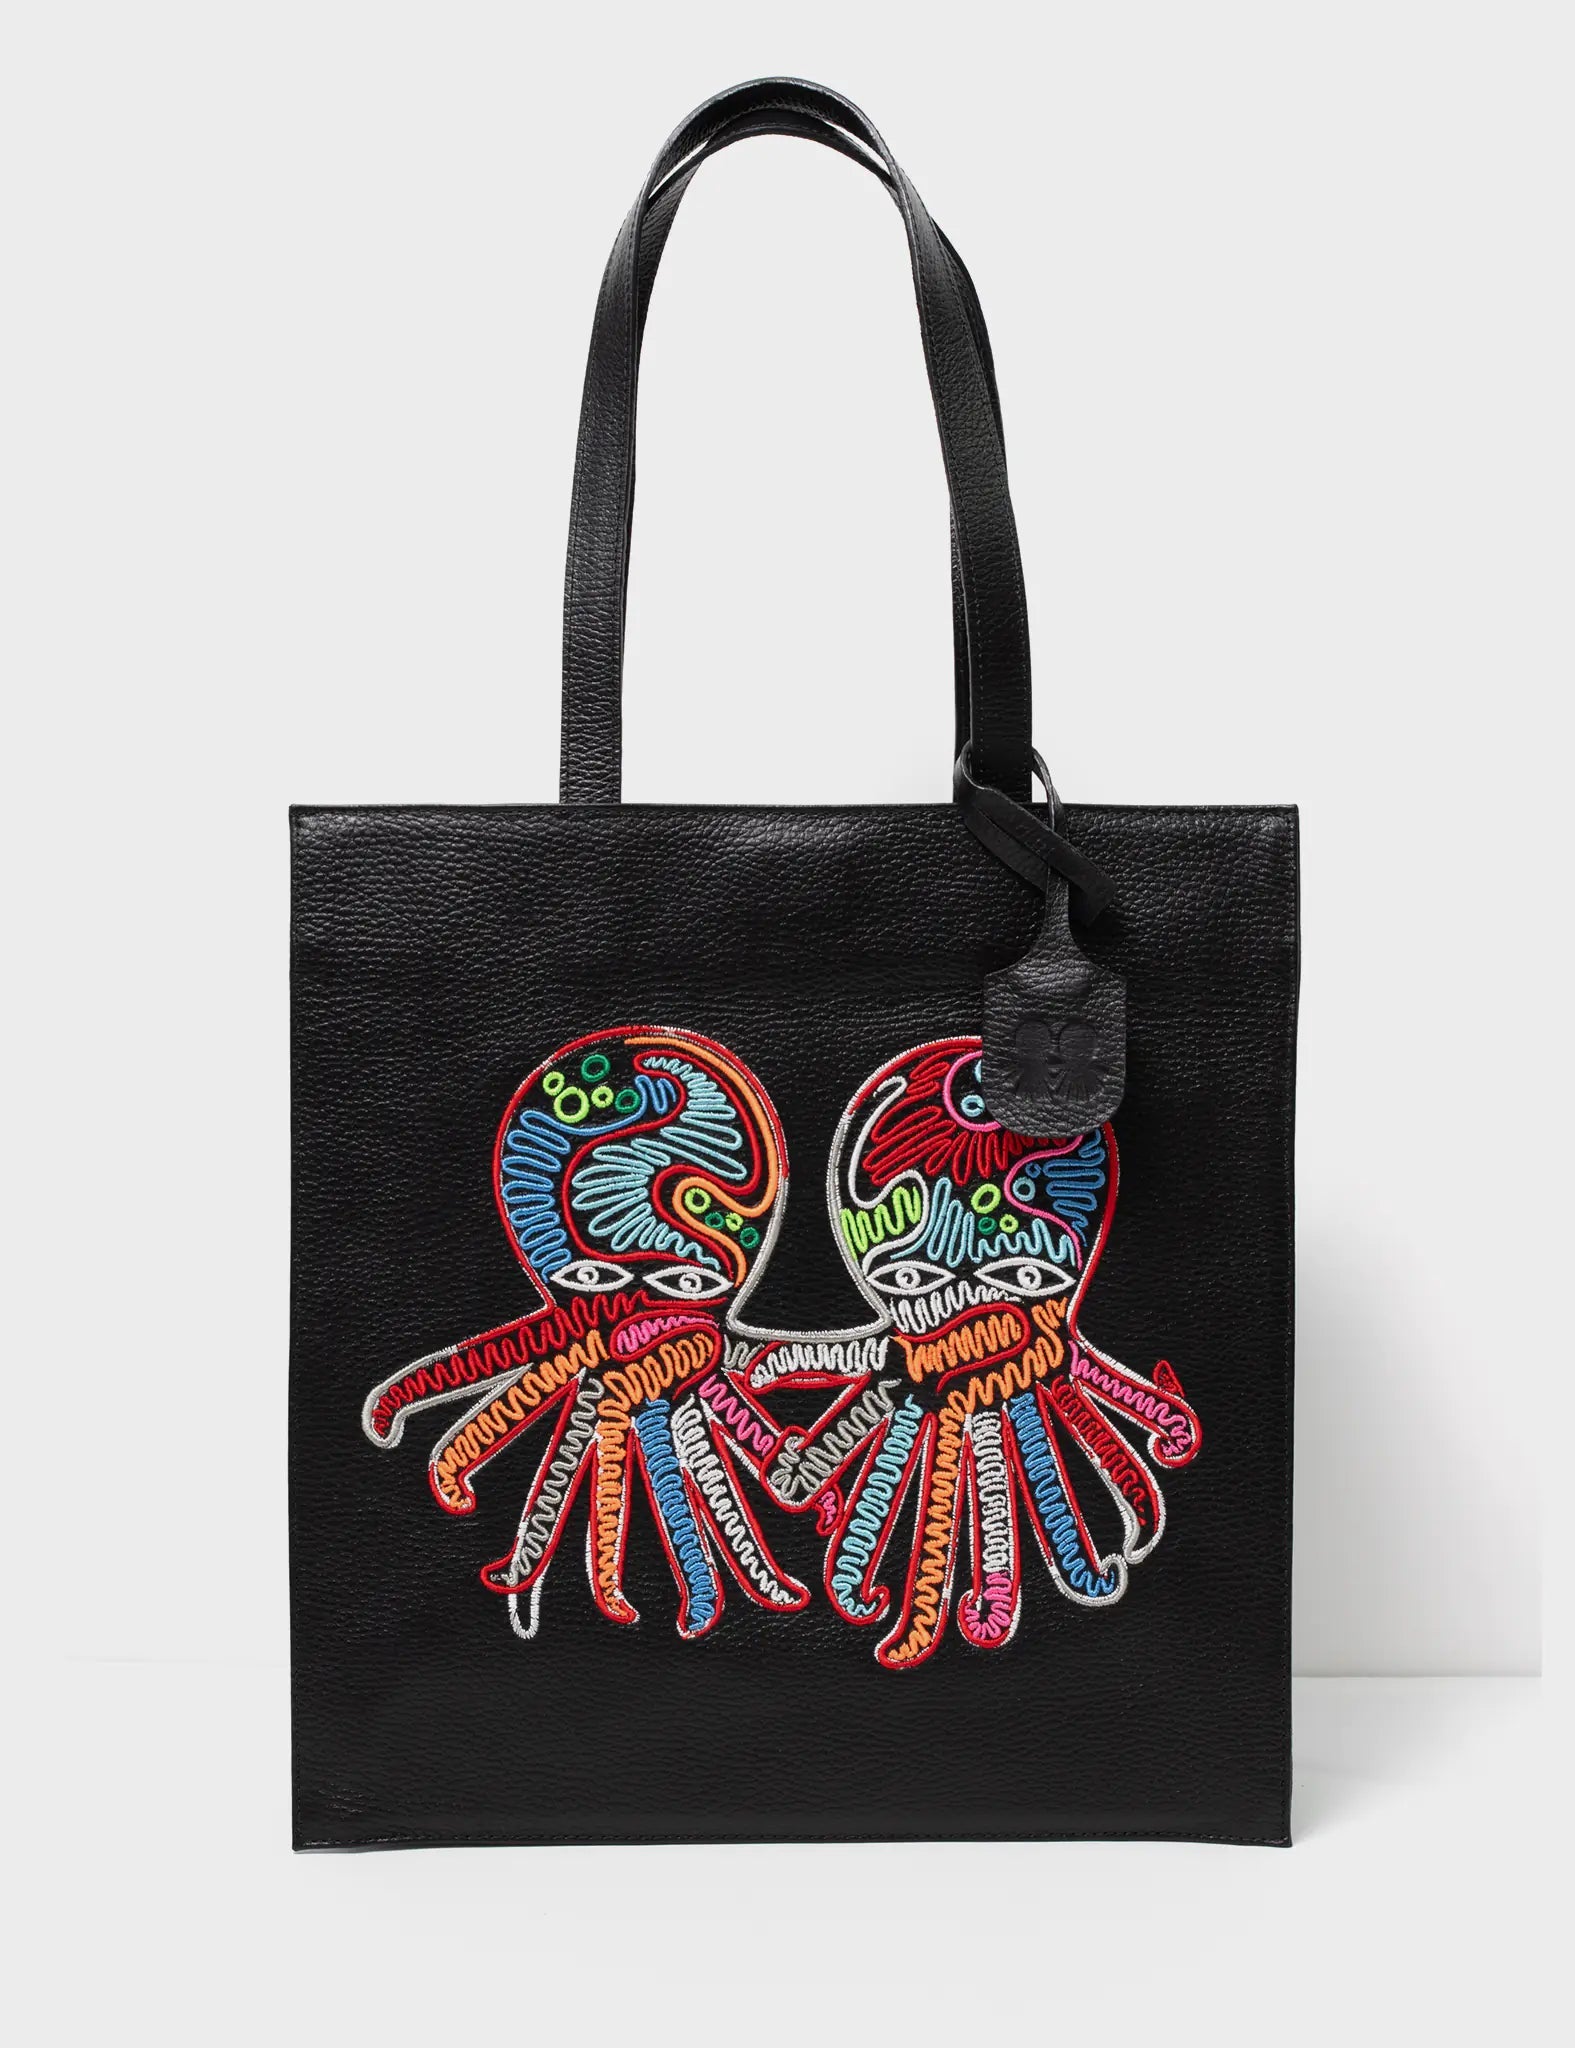 Black Leather Tote Bag - Multicolored Octopus Cord Embroidery - Front